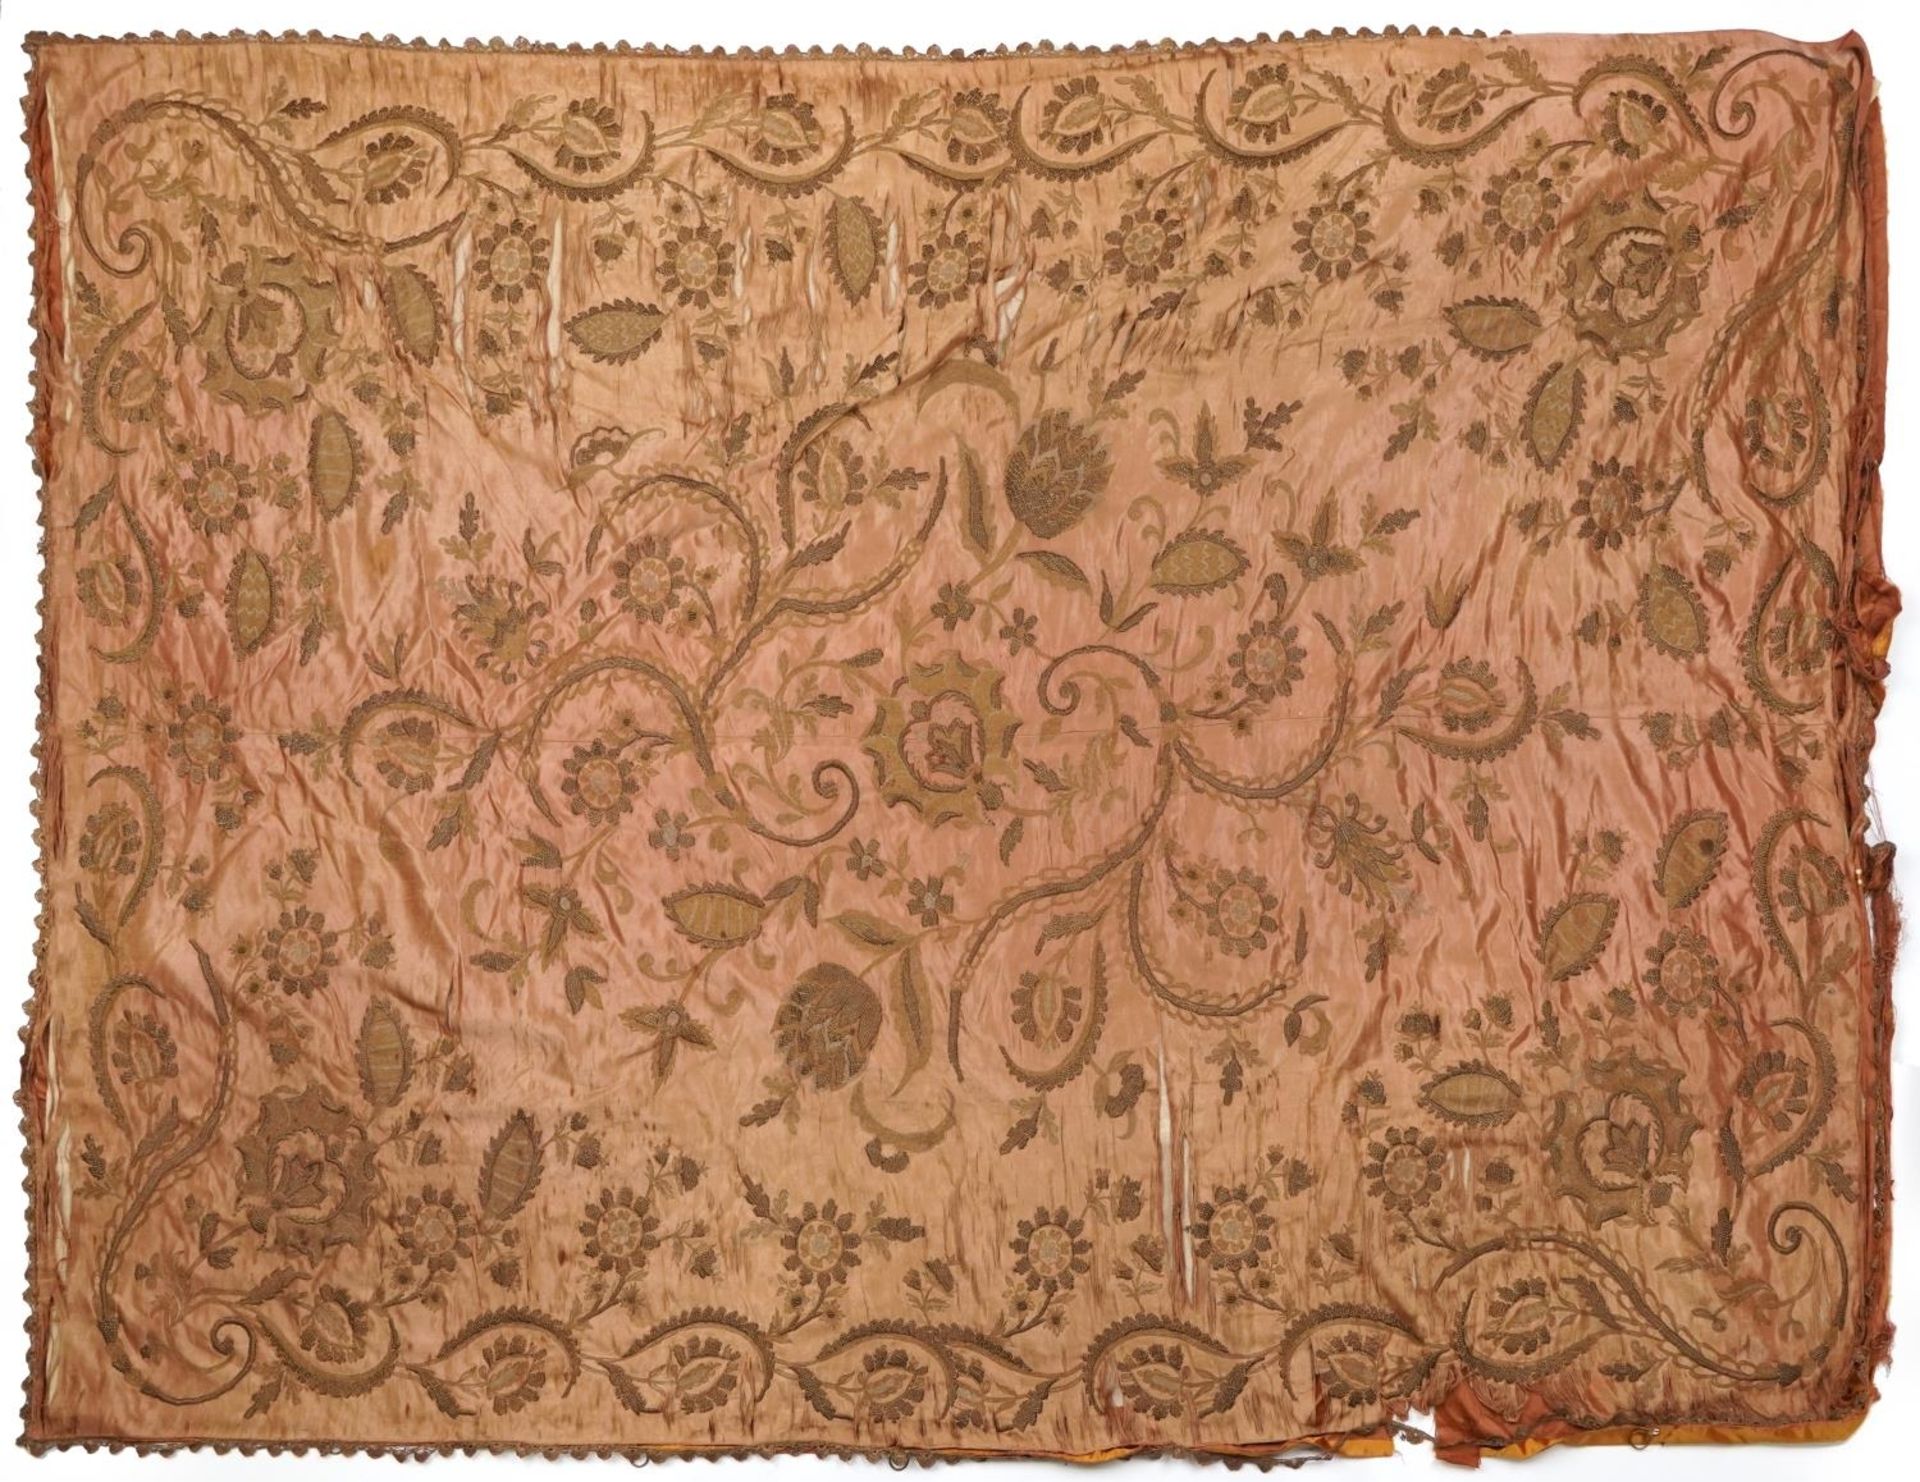 Large Turkish Ottoman silk textile embroidered with flowers, 230cm x 167cm : For further information